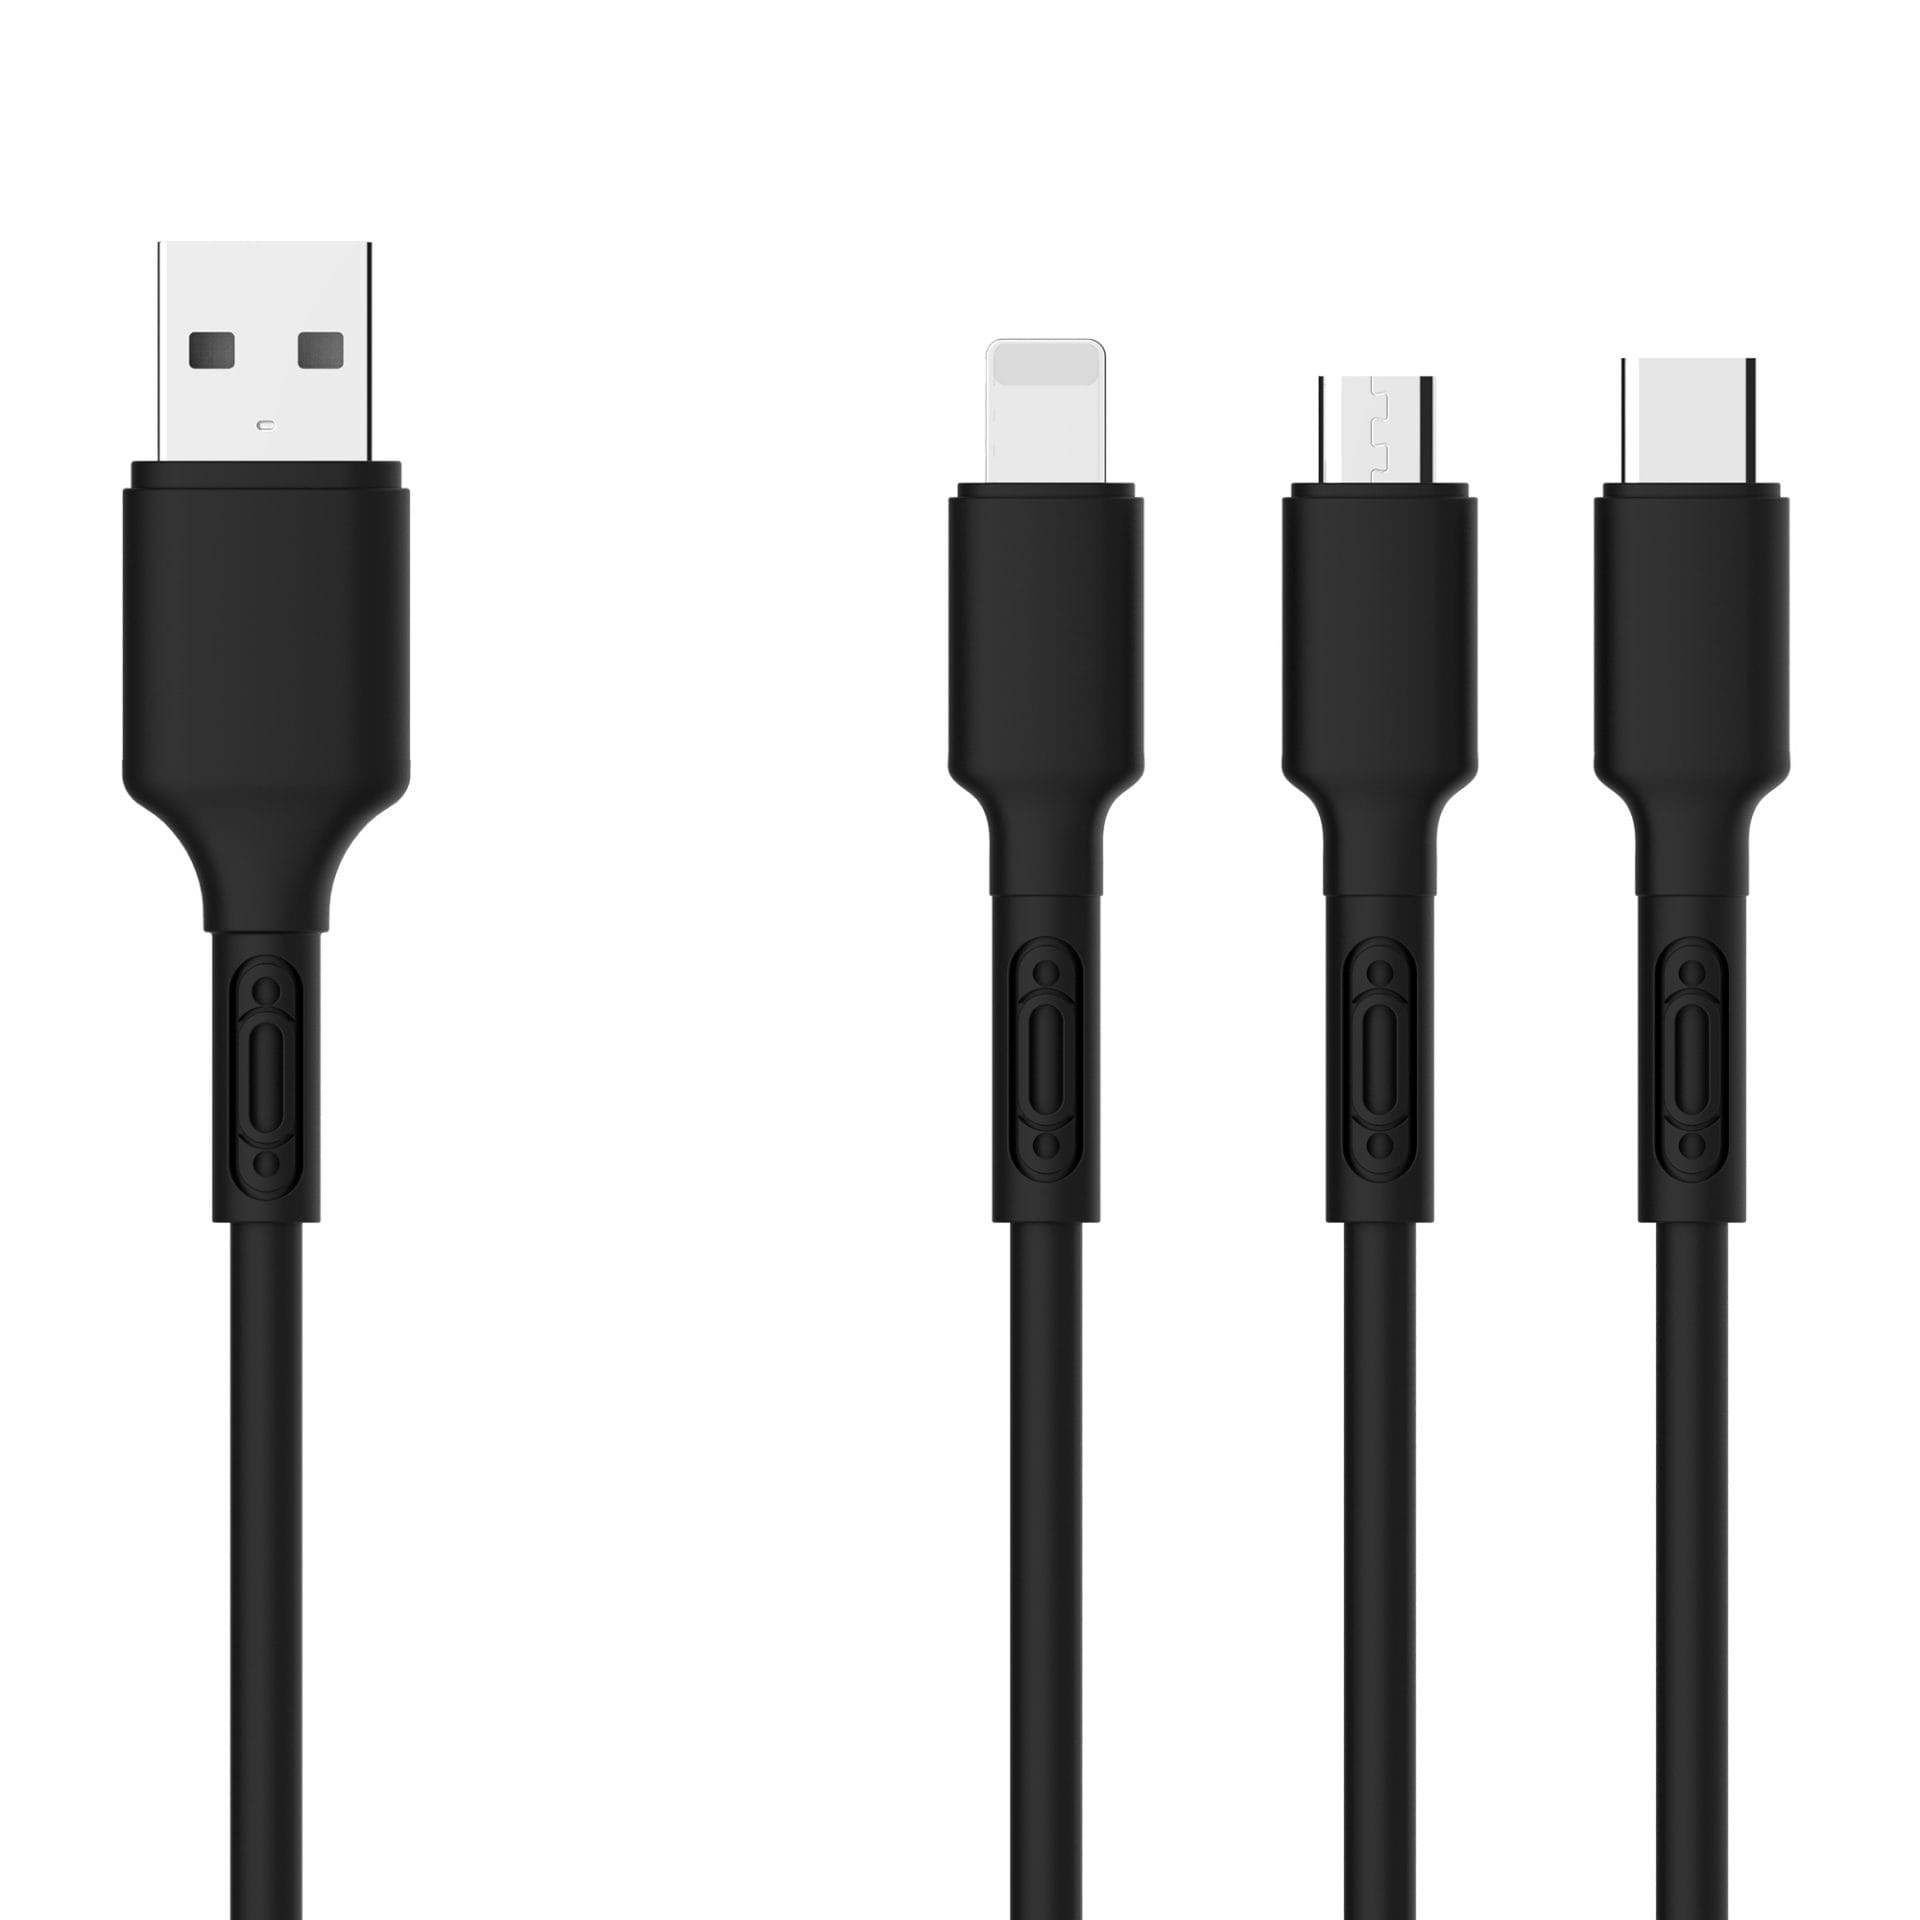 DYH-1706 3 in 1 USB Cable for Charging and Transmitting Data